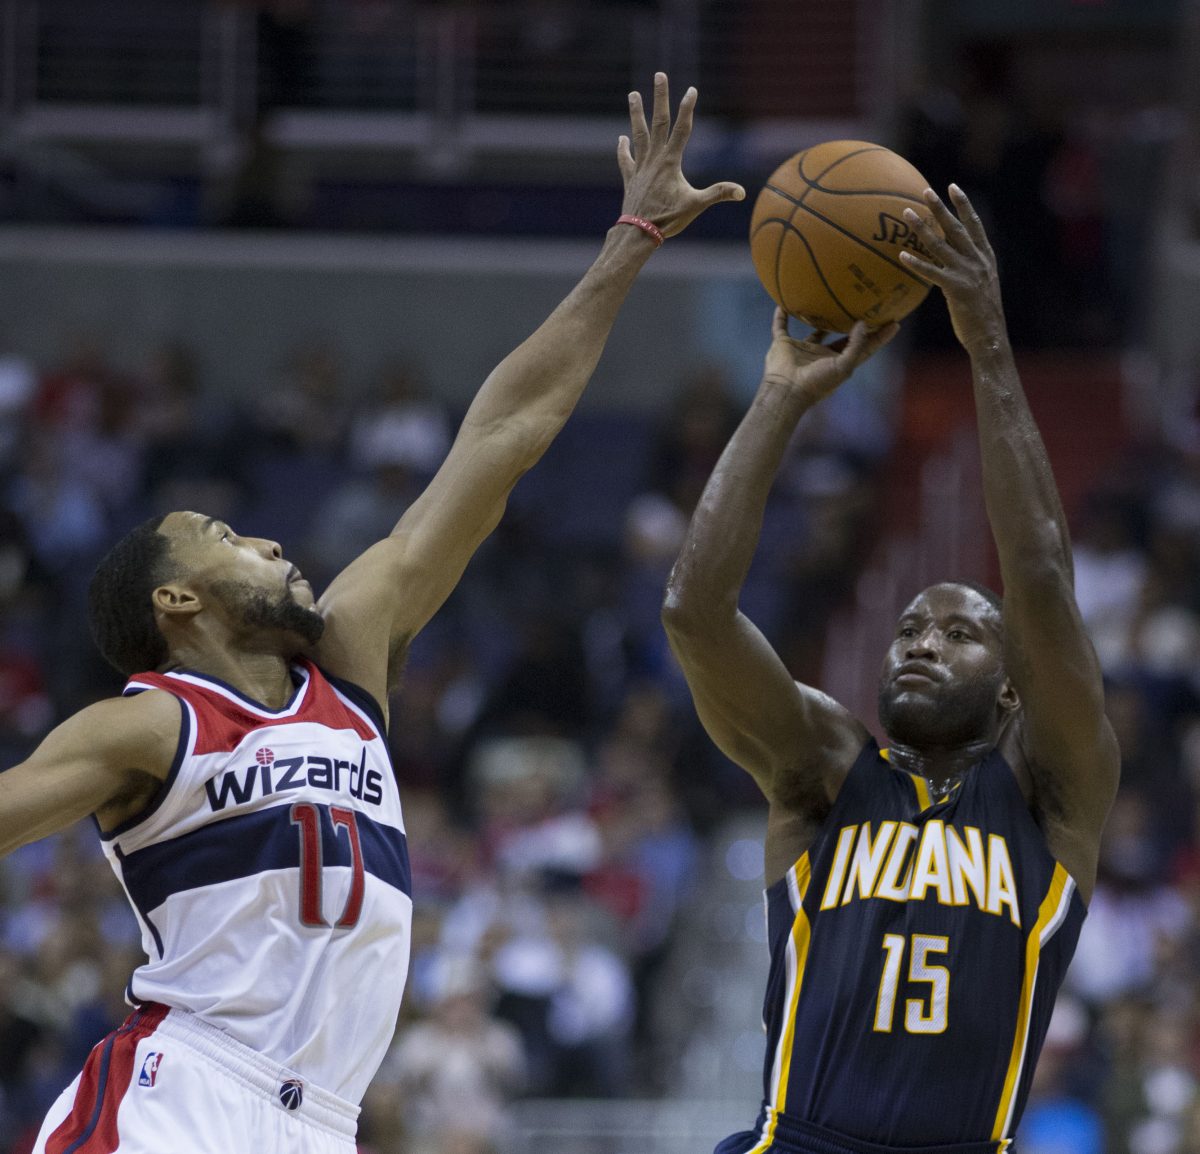 Pacers+at+Wizards+11%2F05%2F14